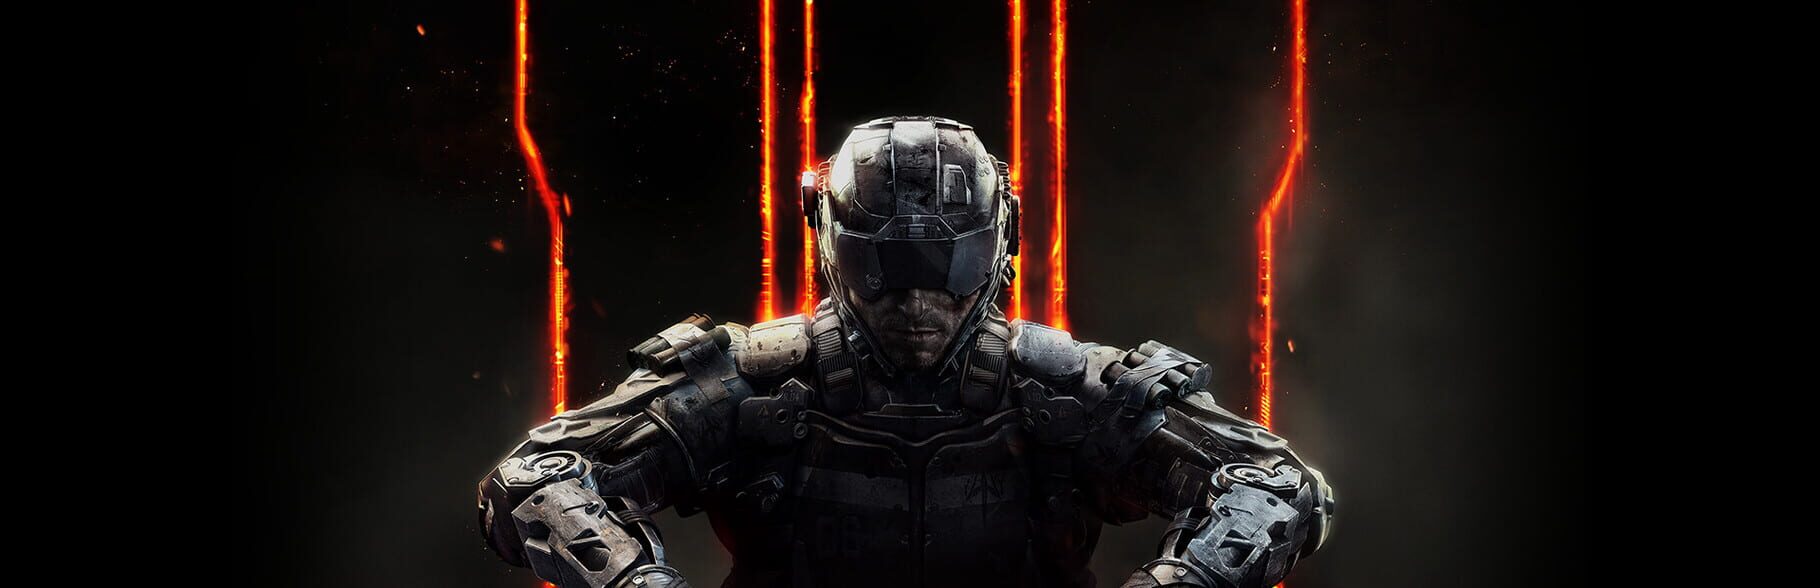 Artwork for Call of Duty: Black Ops III